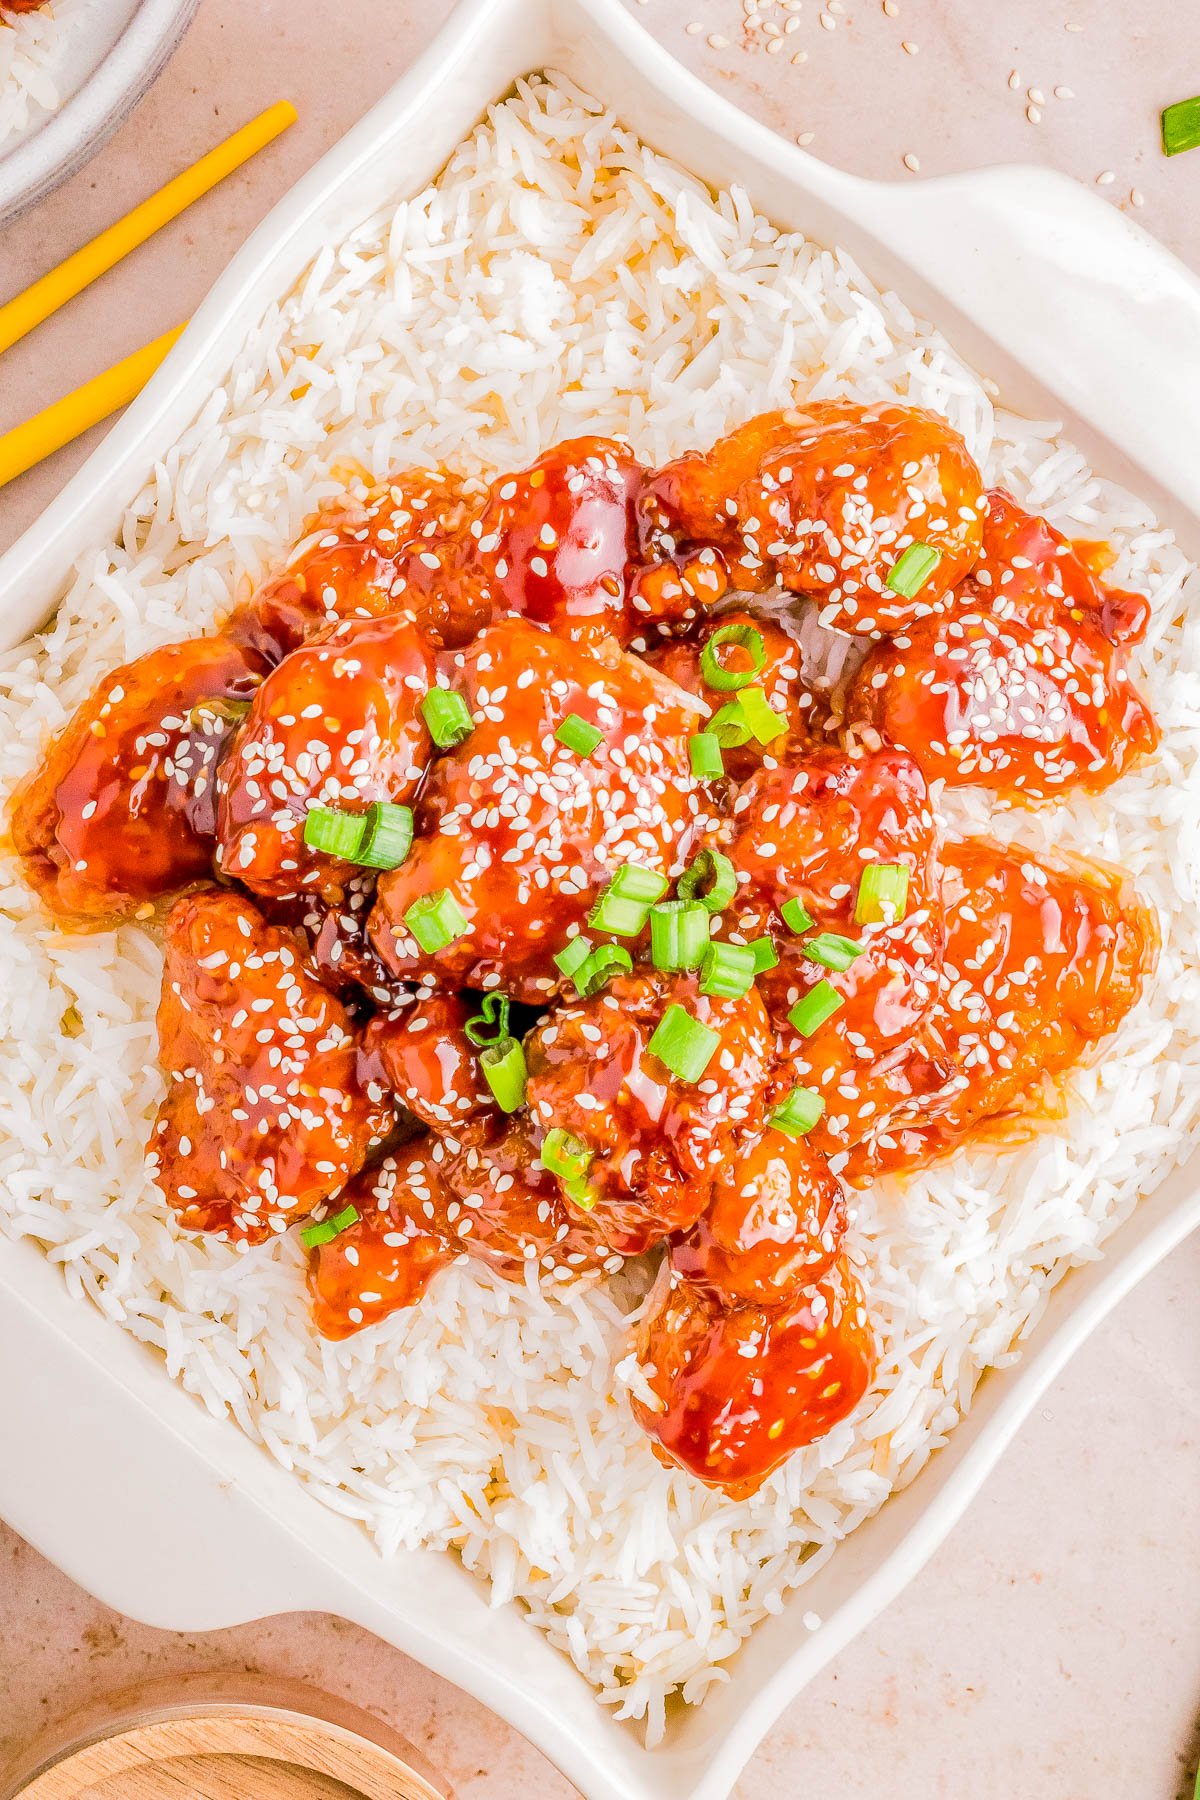 A dish of sesame chicken over white rice, garnished with scallions and sesame seeds, served on a white plate with chopsticks on the side.